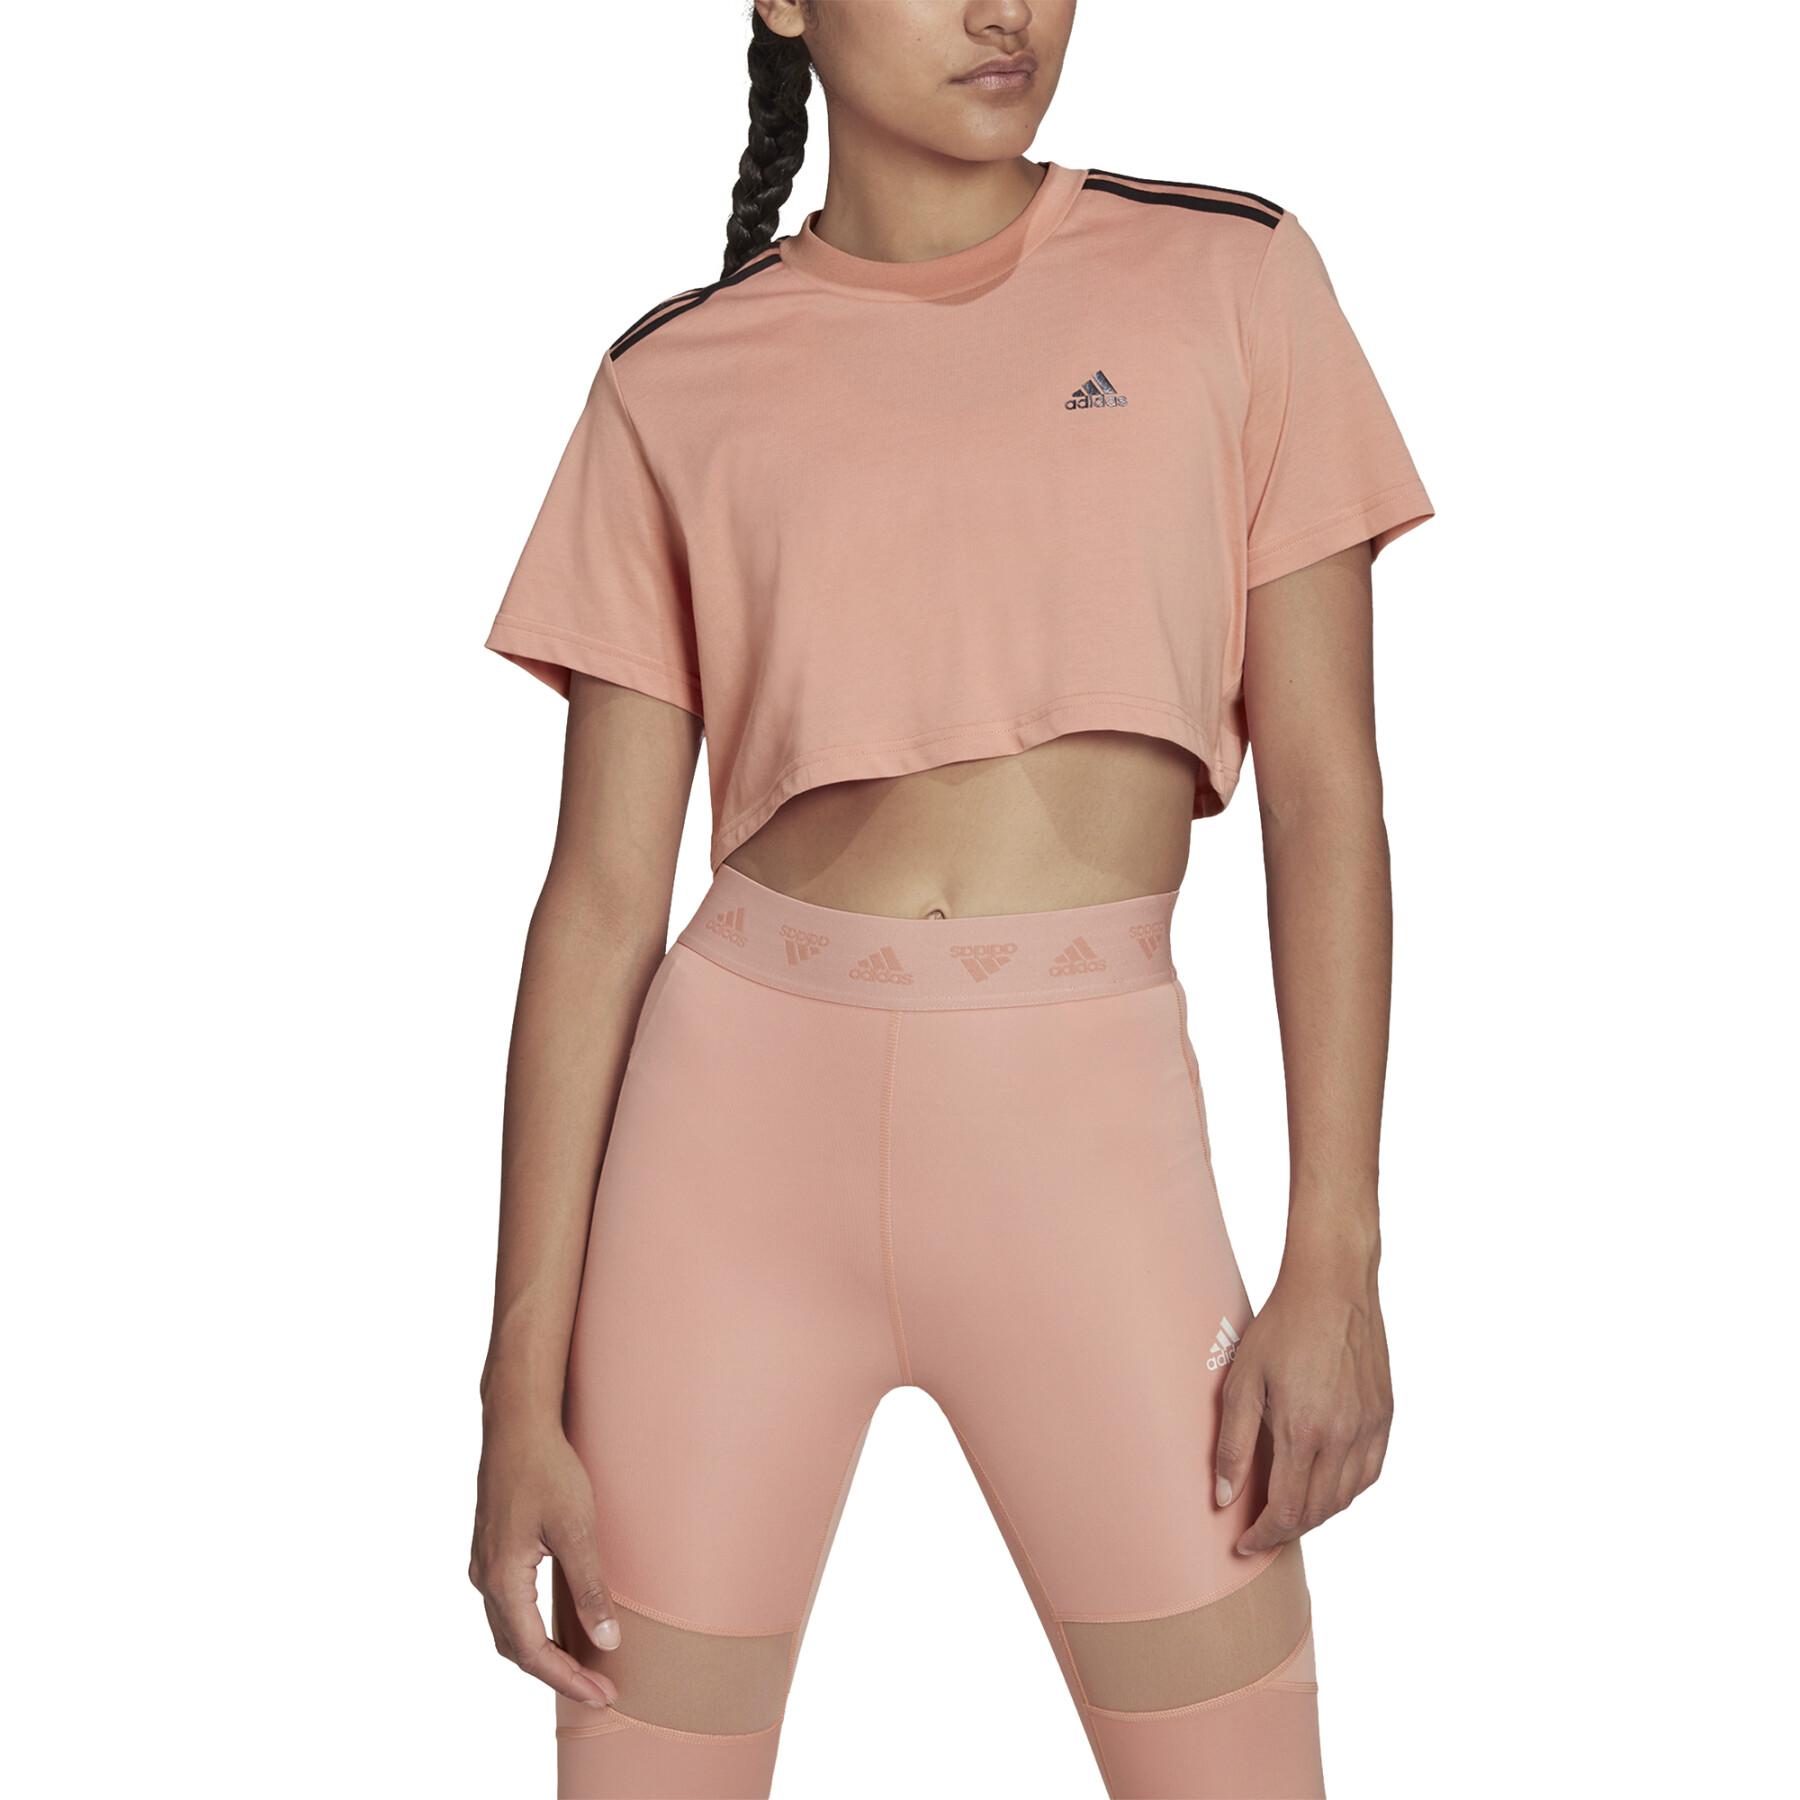 T-shirt mulher adidas Cropped